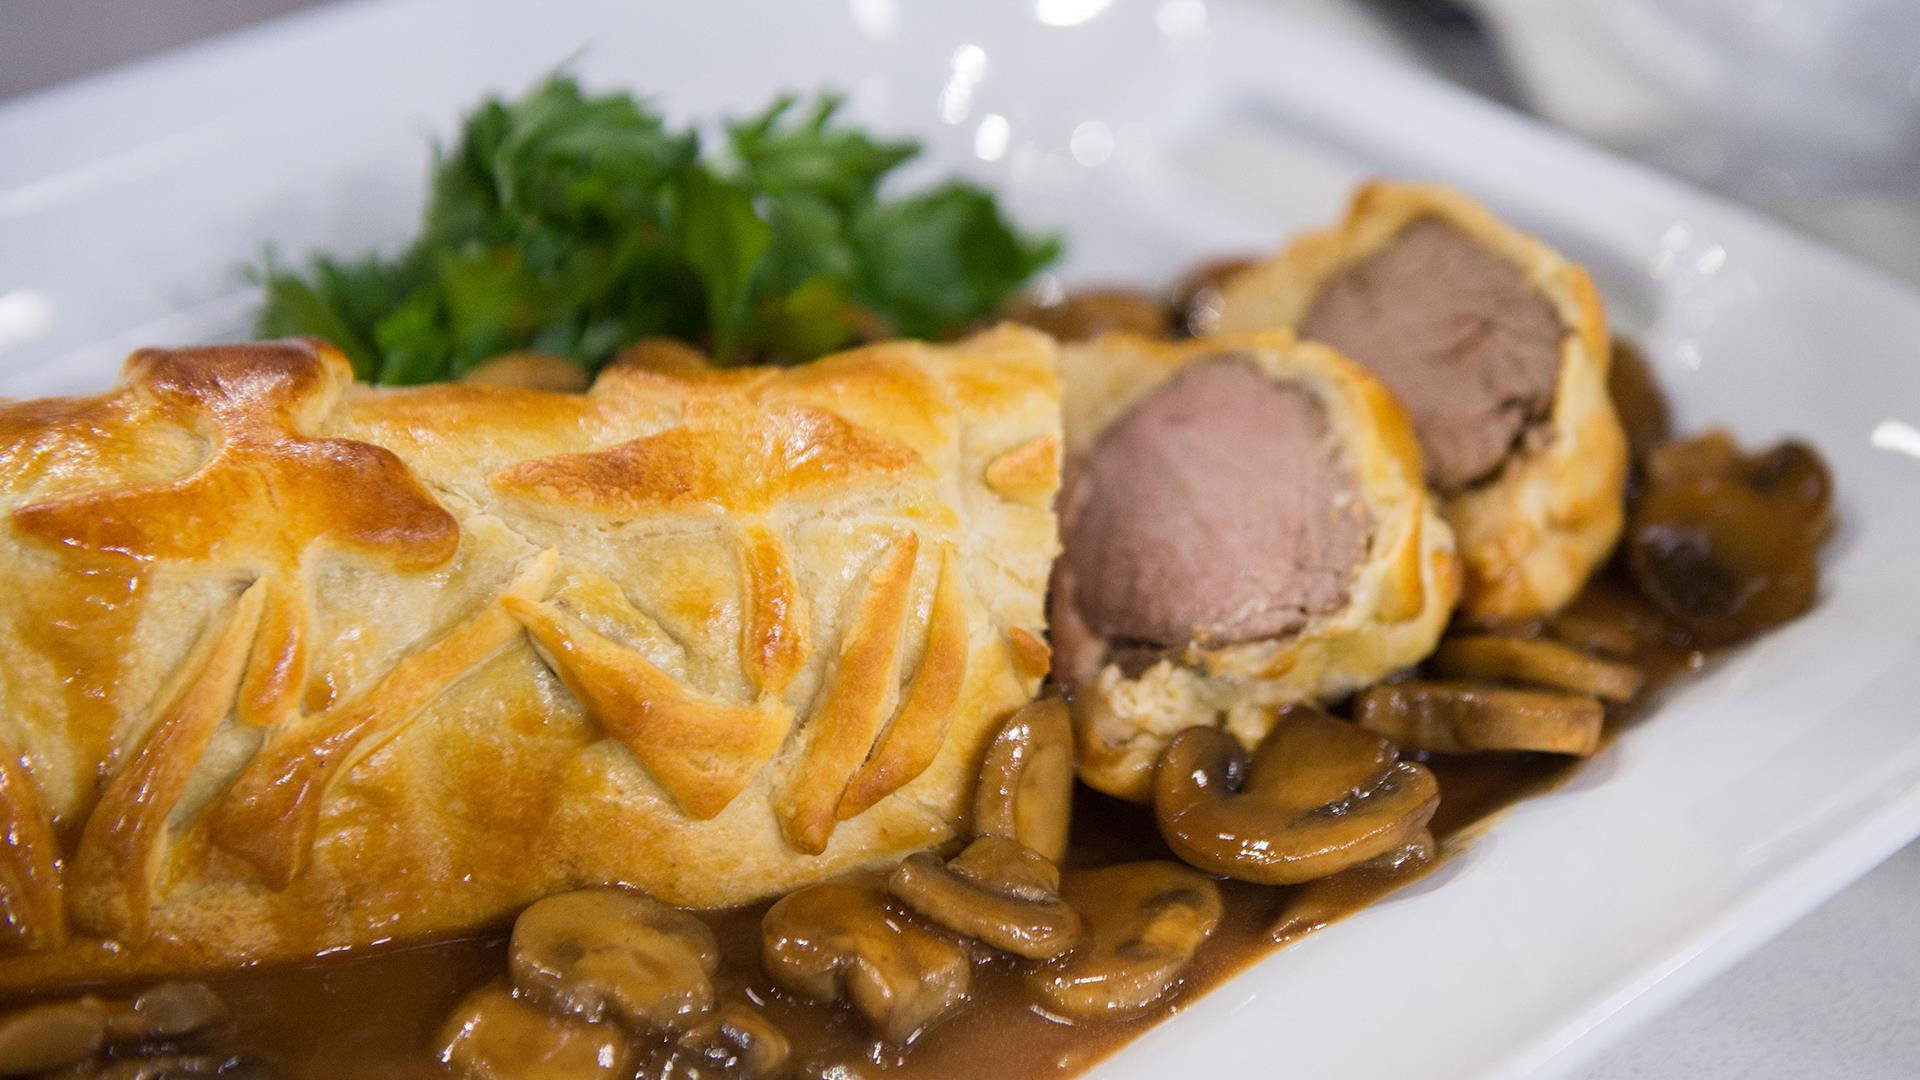 "A classic gourmet Beef Wellington served with rich mushroom sauce." Wallpaper